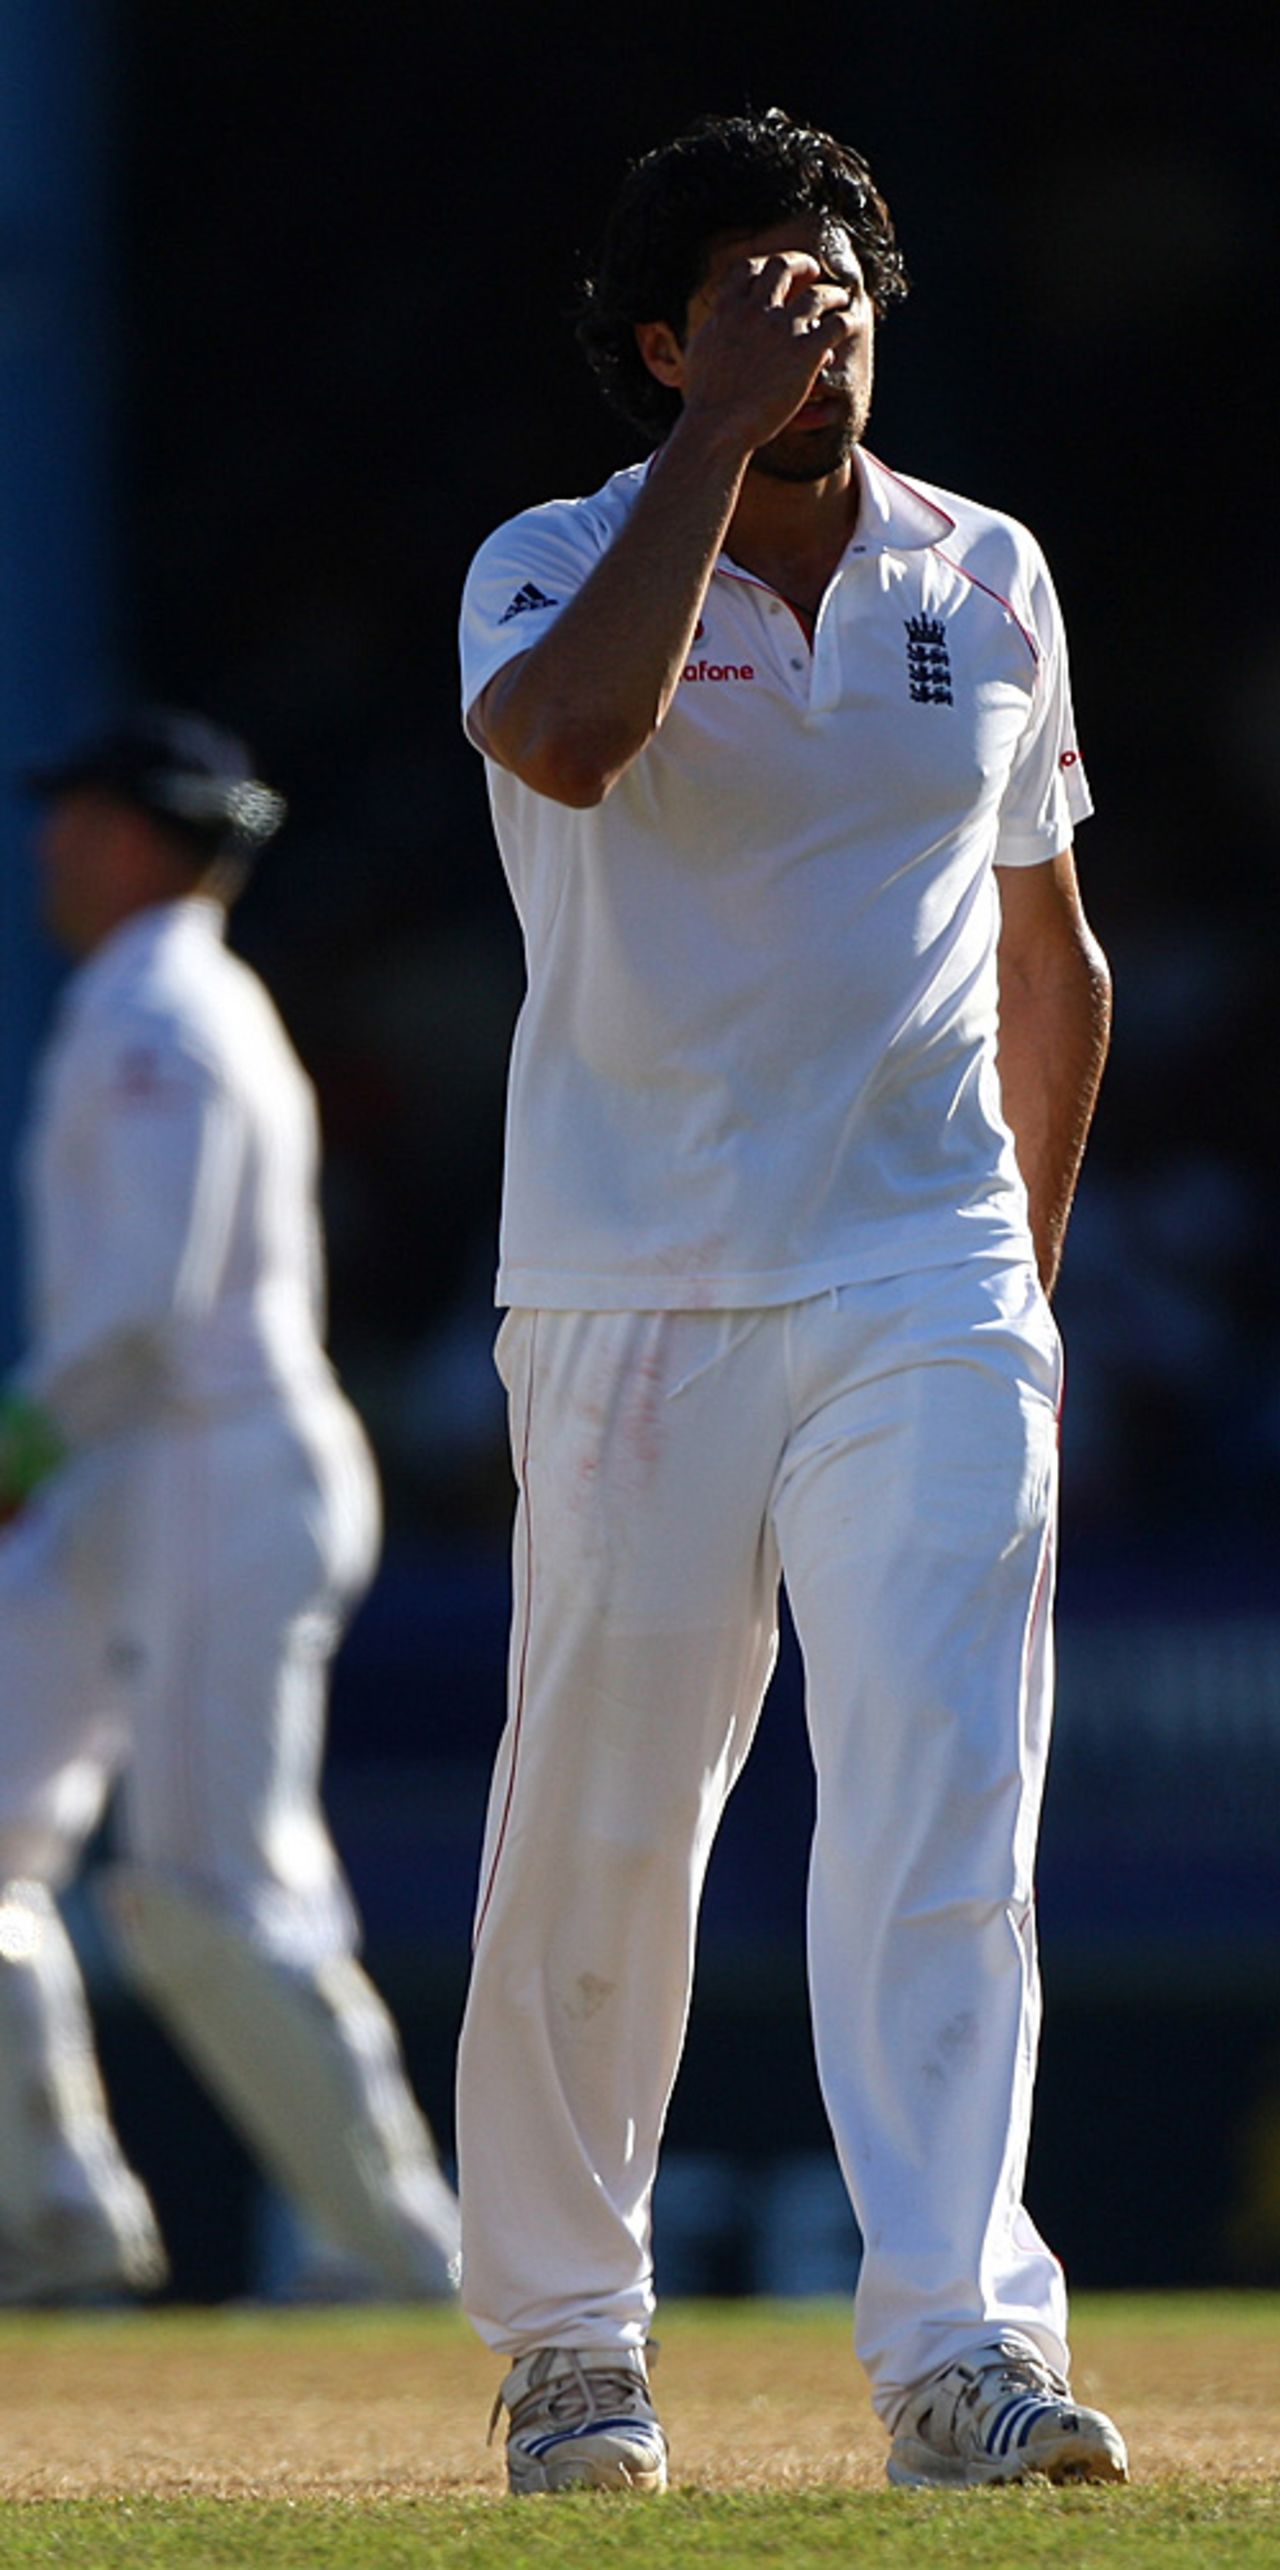 Amjad Khan trudges back to his mark disconsolately after spraying the ball on debut, West Indies v England, 5th Test, Trinidad, March 7, 2009